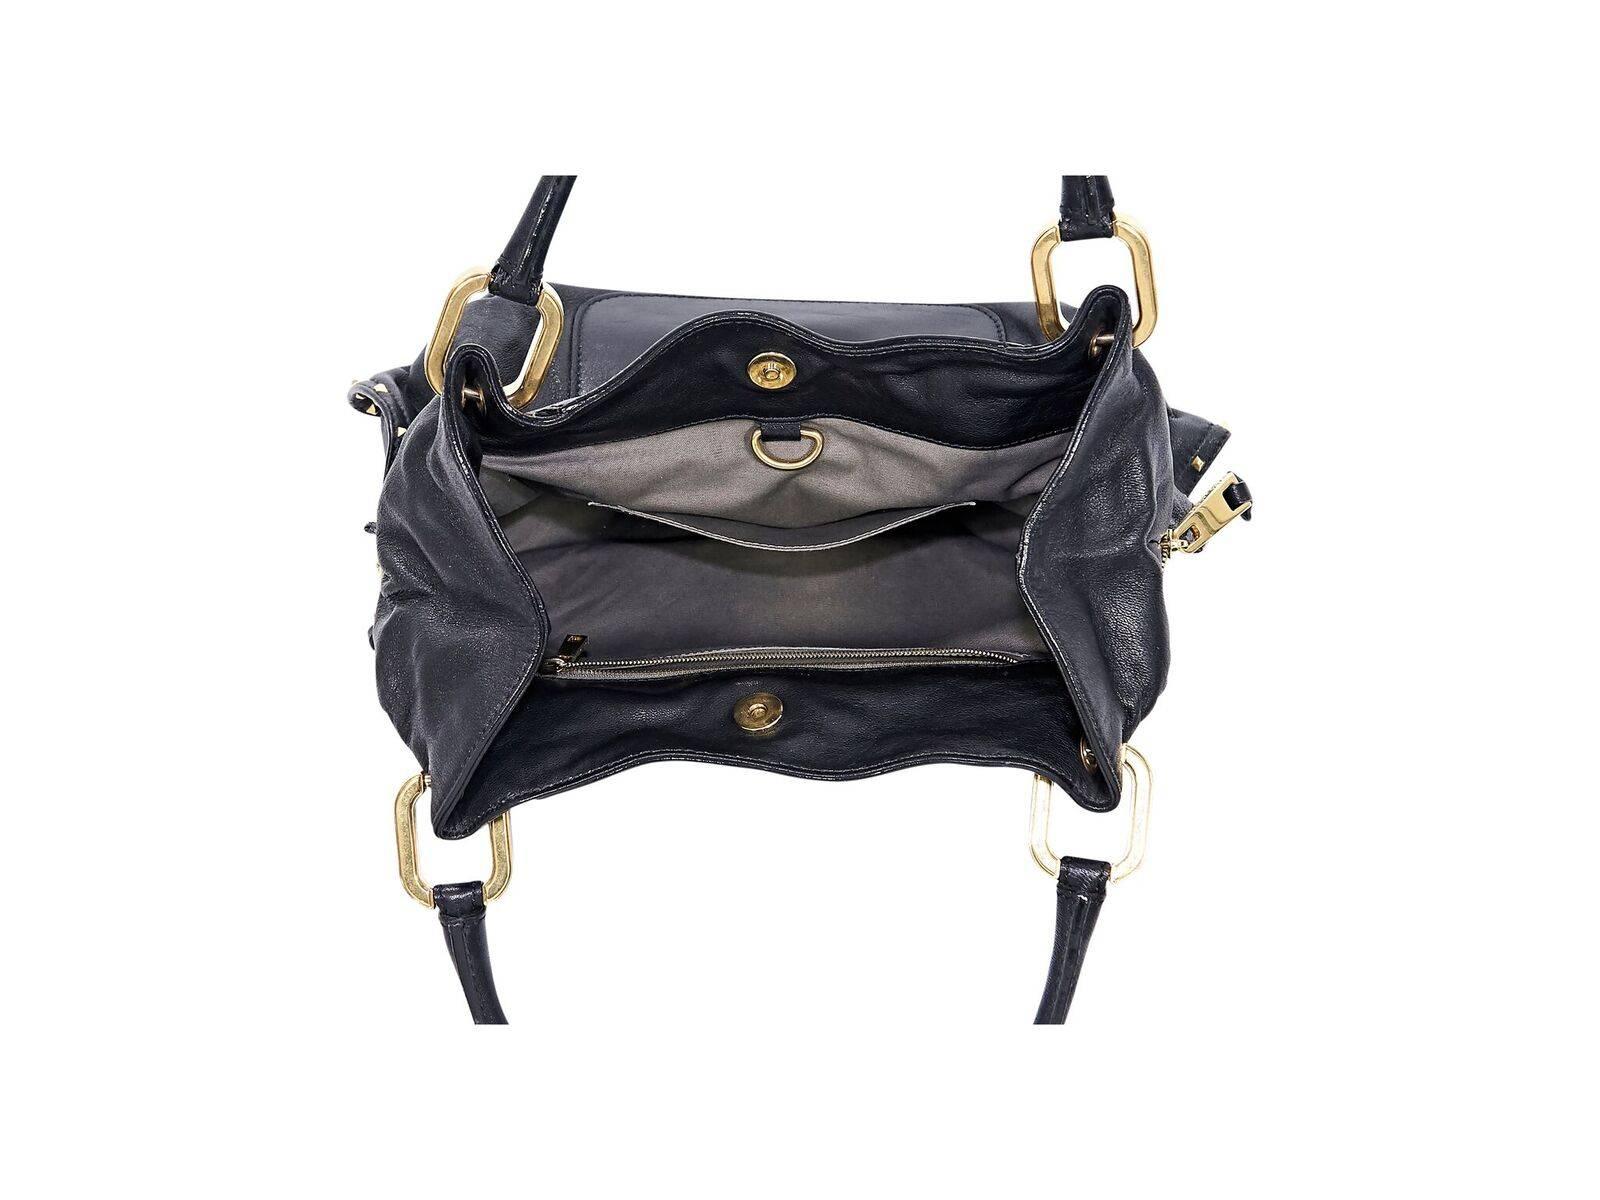 Product details:  Black leather shoulder bag by Marc Jacobs.  Pyramid studded trim.  Dual shoulder straps.  Magnetic snap closure.  Lined interior with inner zip and slide pockets.  Front exterior slide pocket accented with a padlock.  Side zippers.